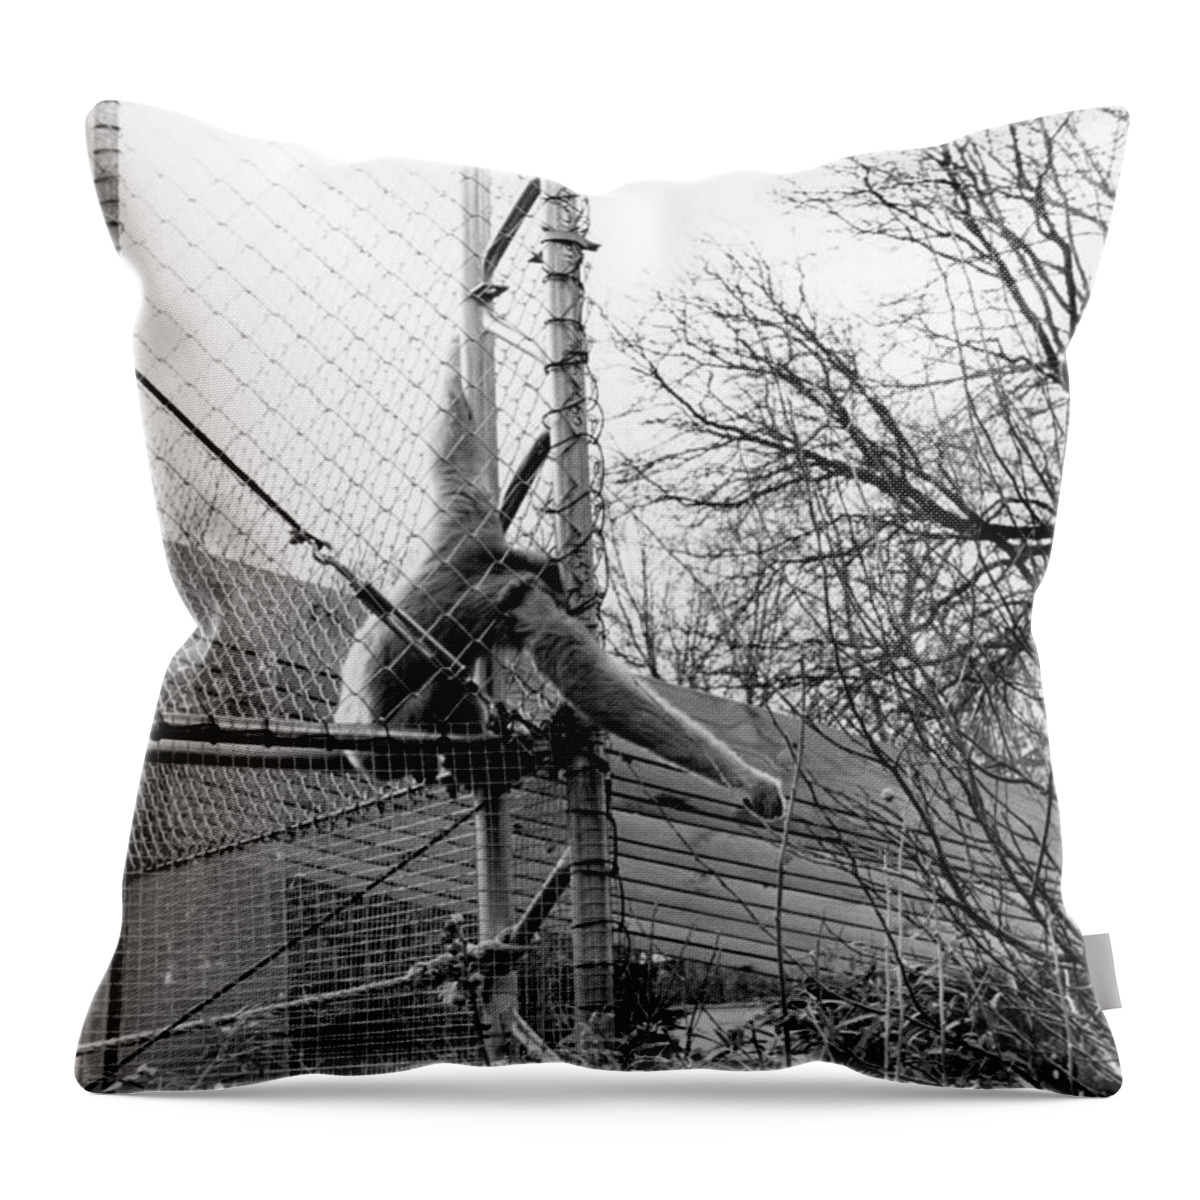 Monkey Throw Pillow featuring the photograph Monkey Grab by Joseph Caban